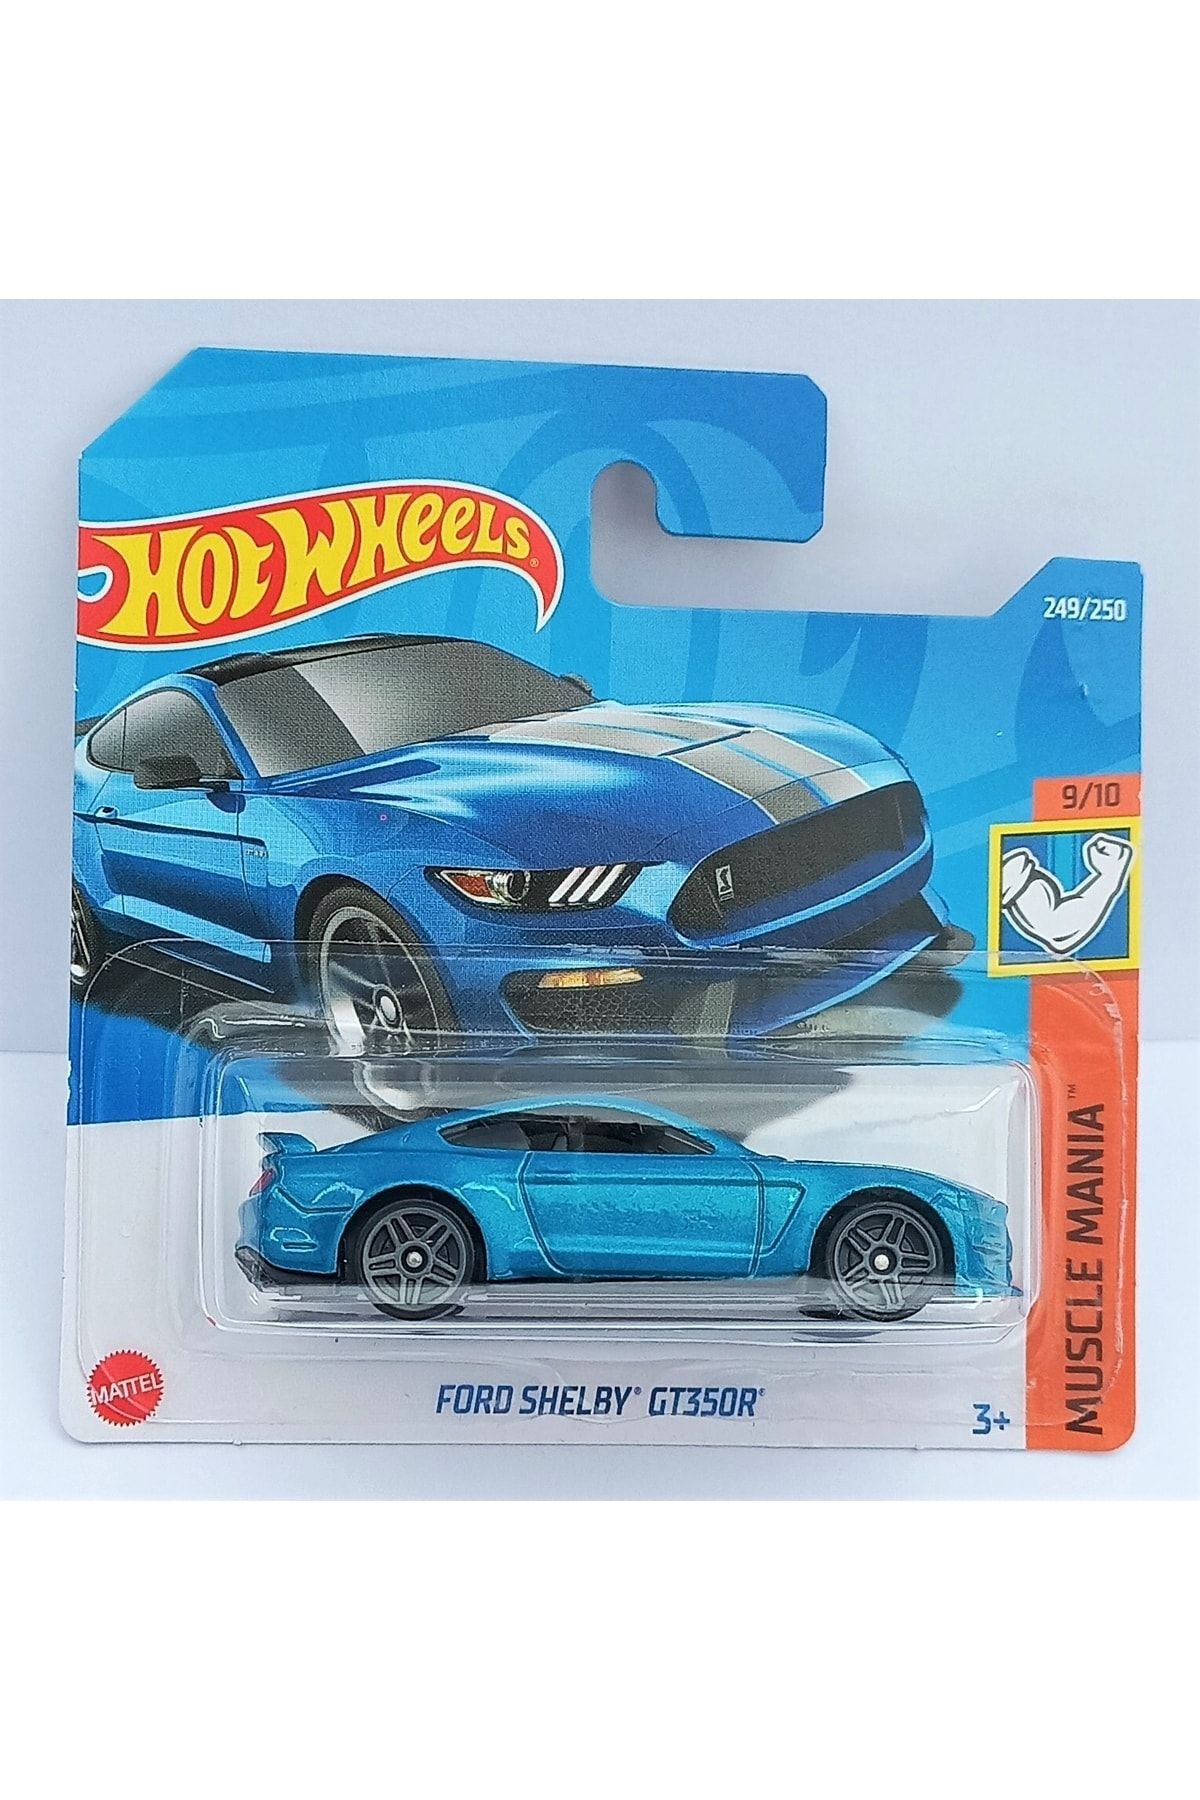 HOT WHEELS Ford Shelby Gt350r